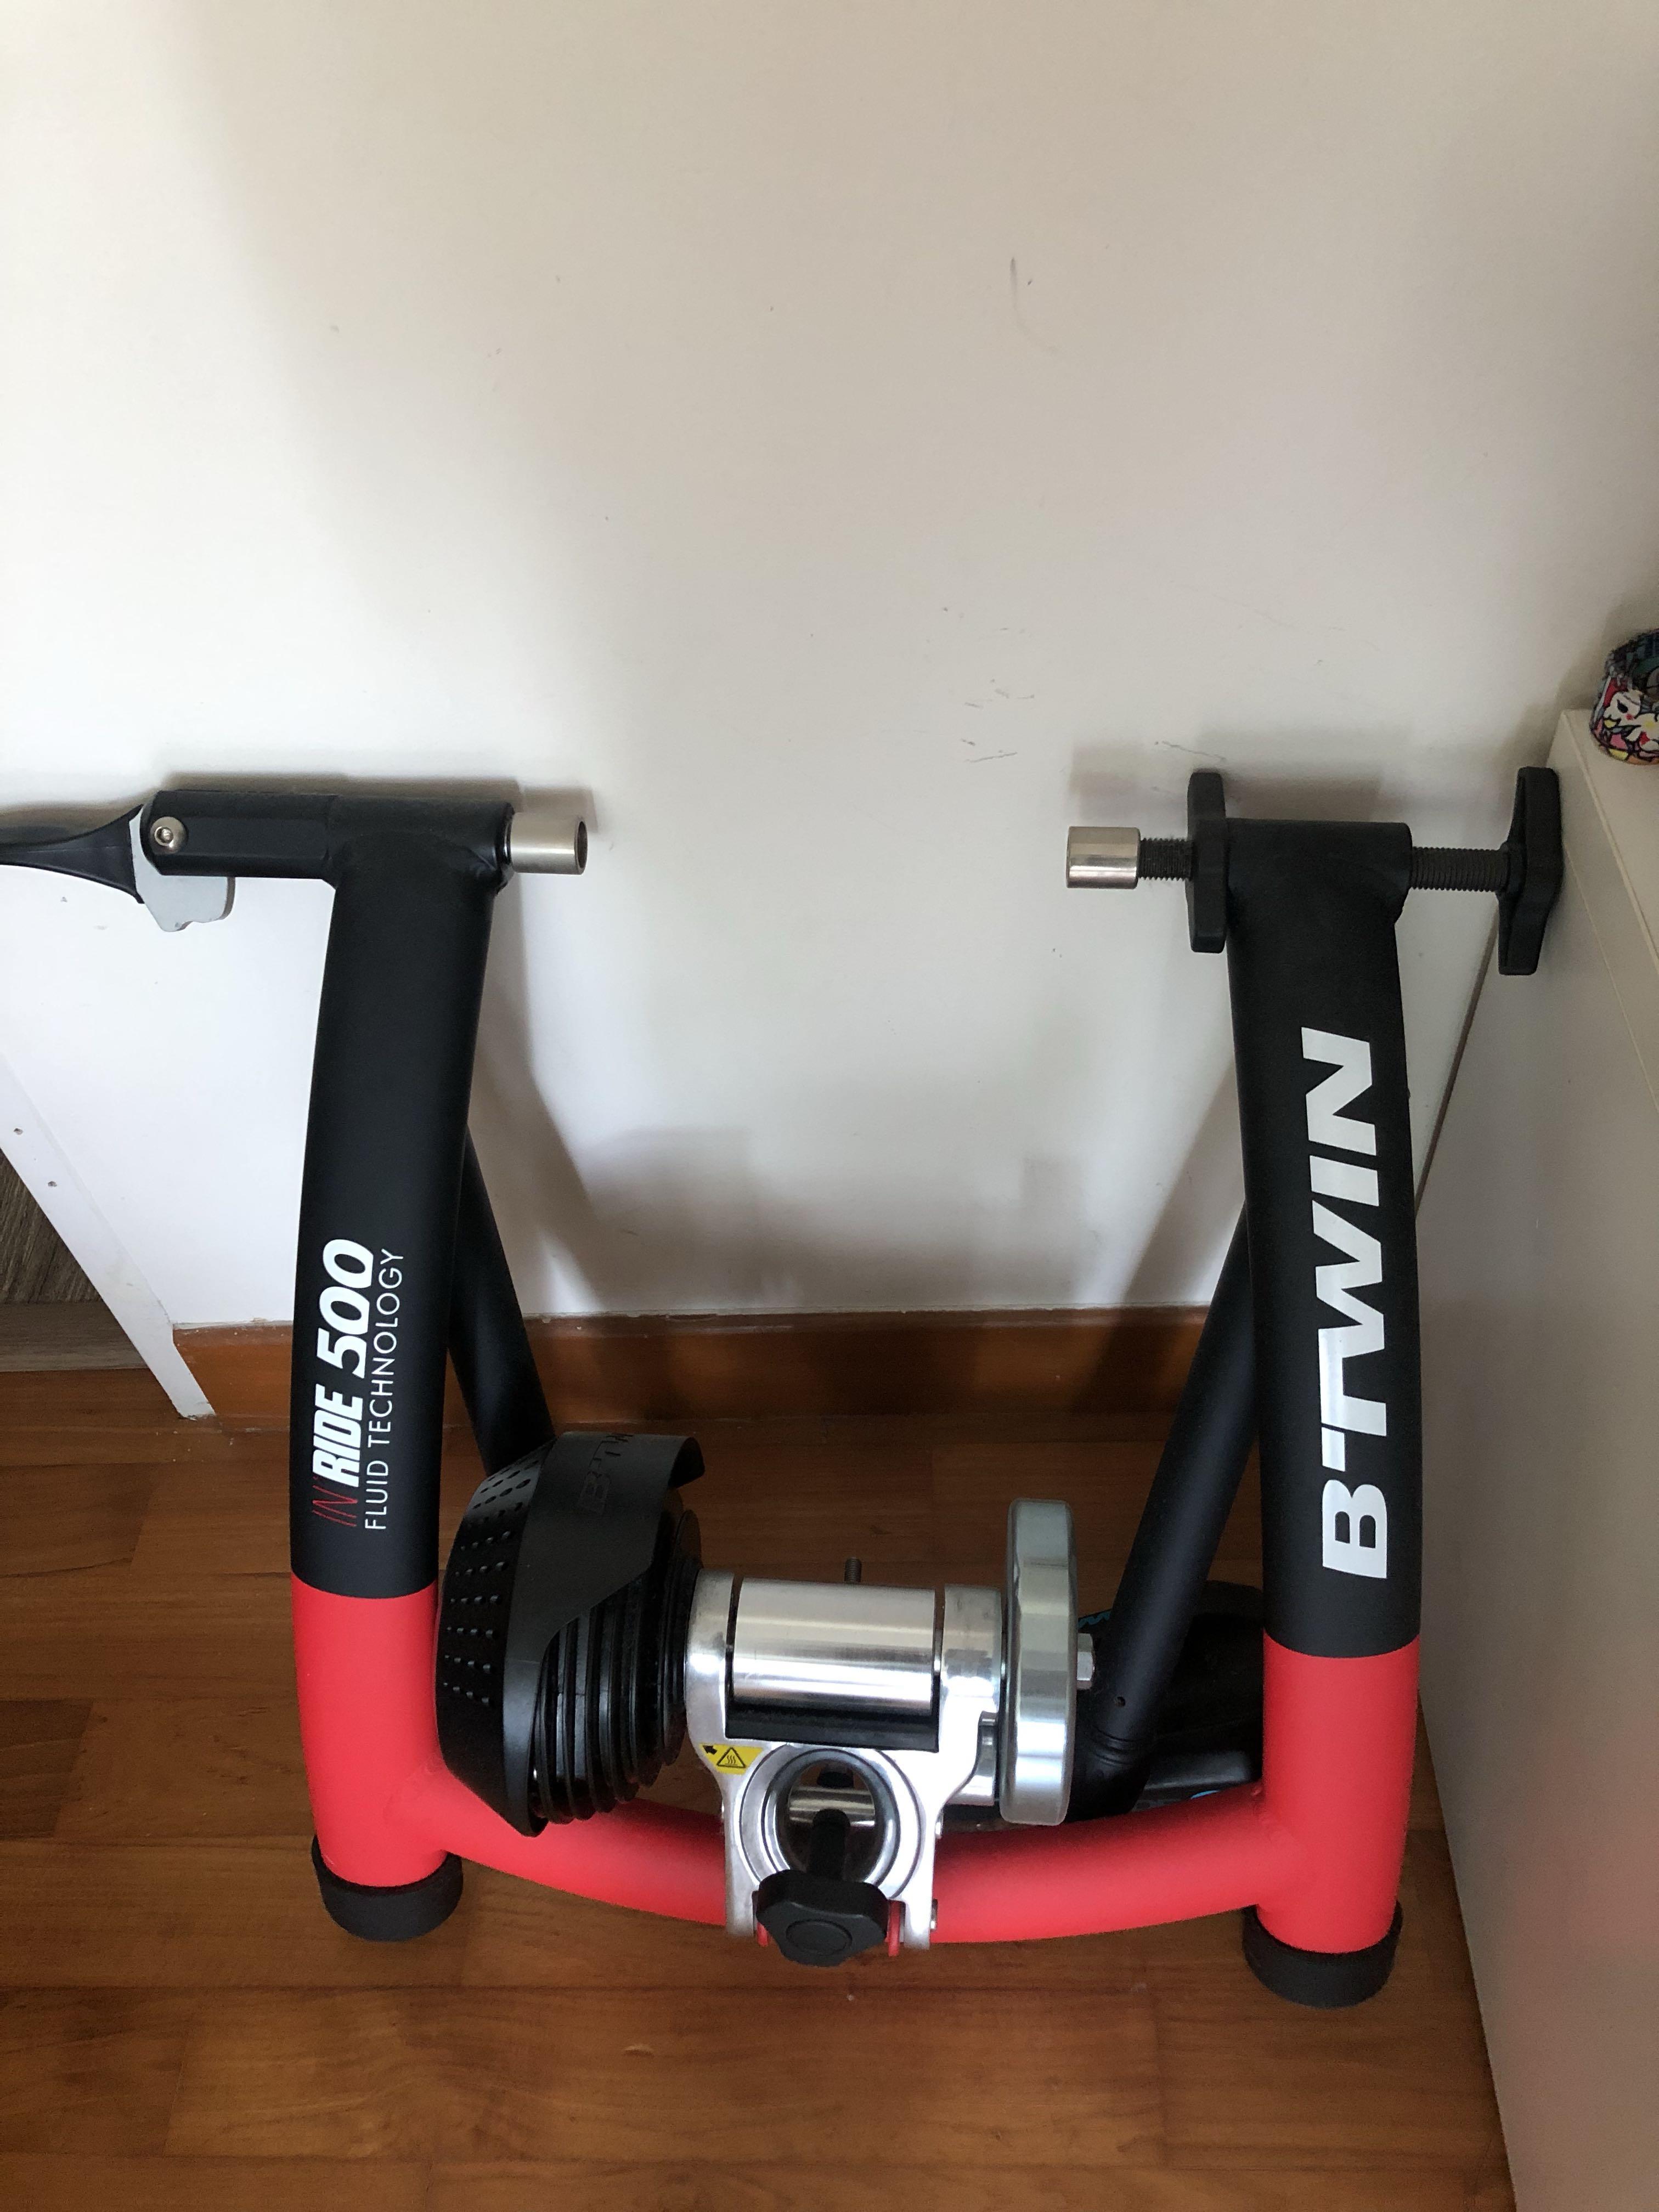 btwin cycle trainer